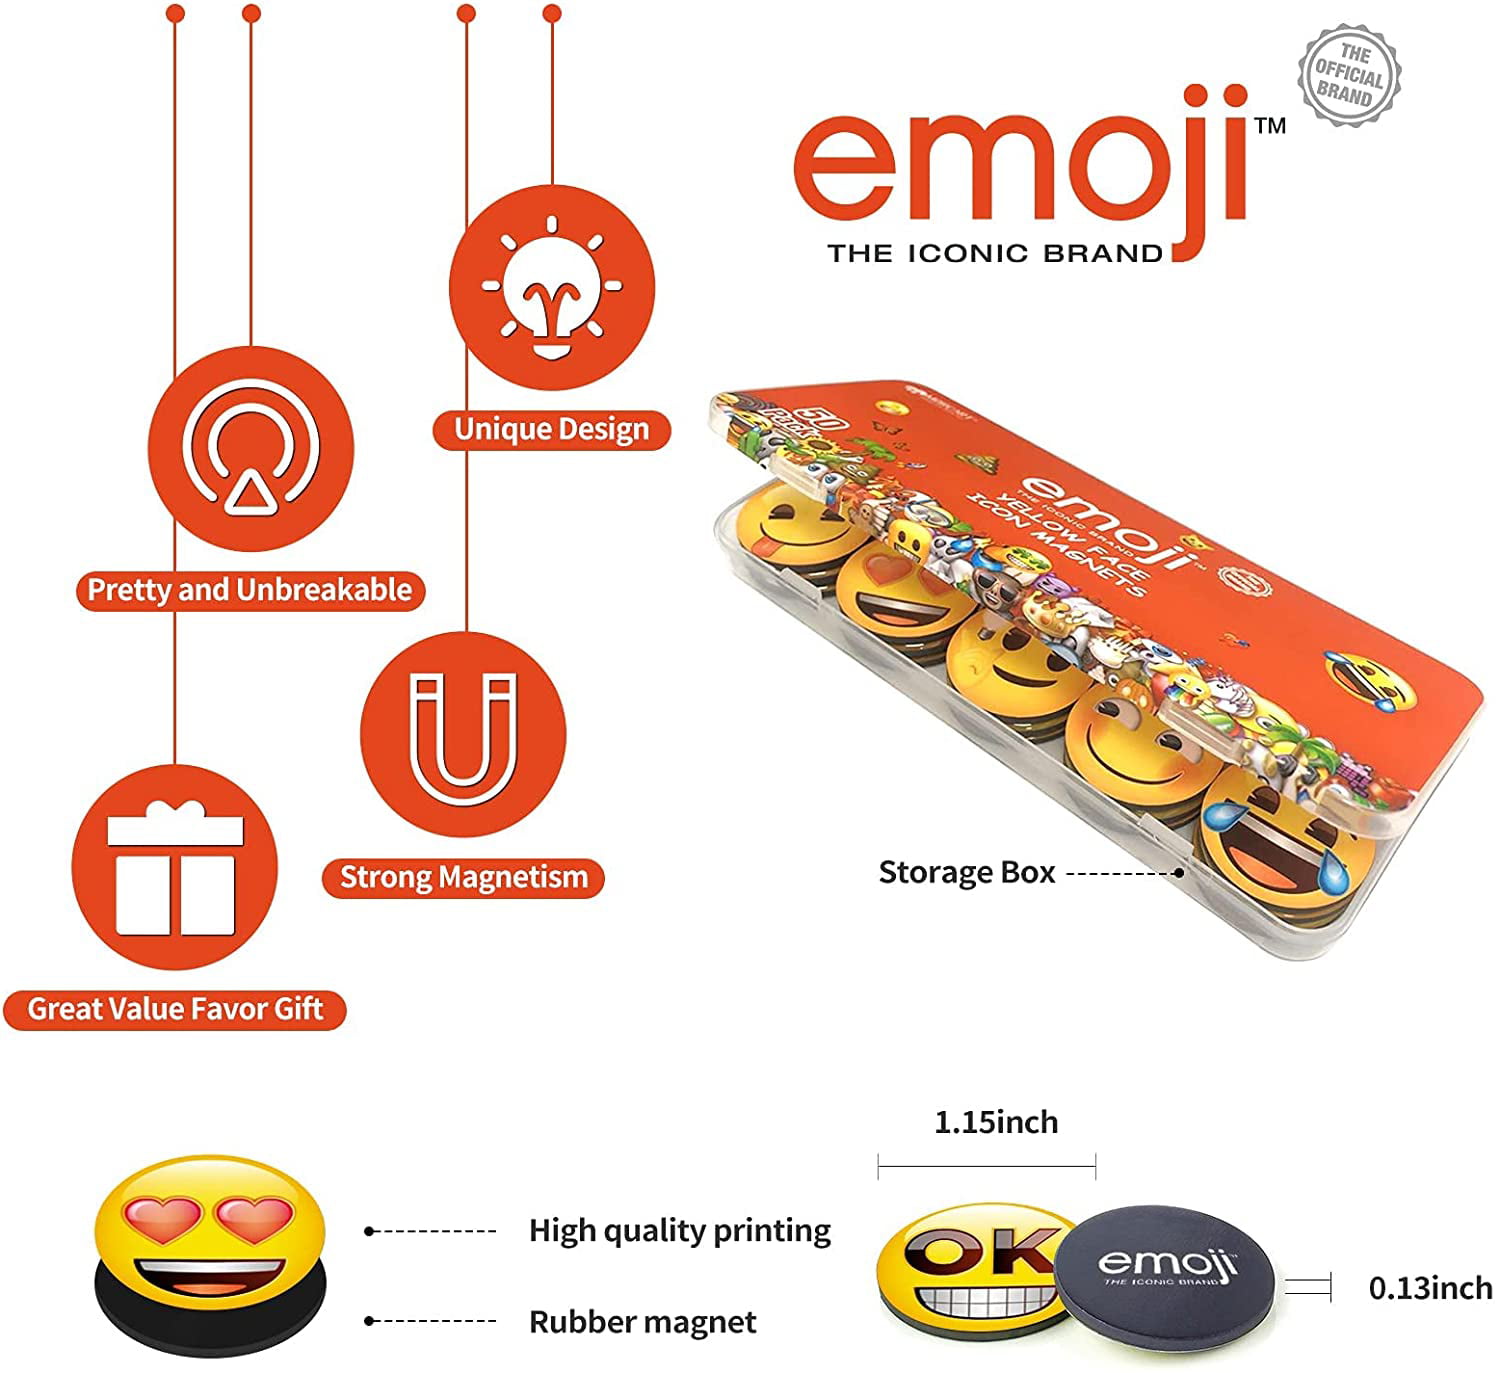 MORCART 25Pcs Emoji Magnets for Fridge Refrigerator Decorative Lockers Whiteboards Office Kitchen Cute Funny Gifts 